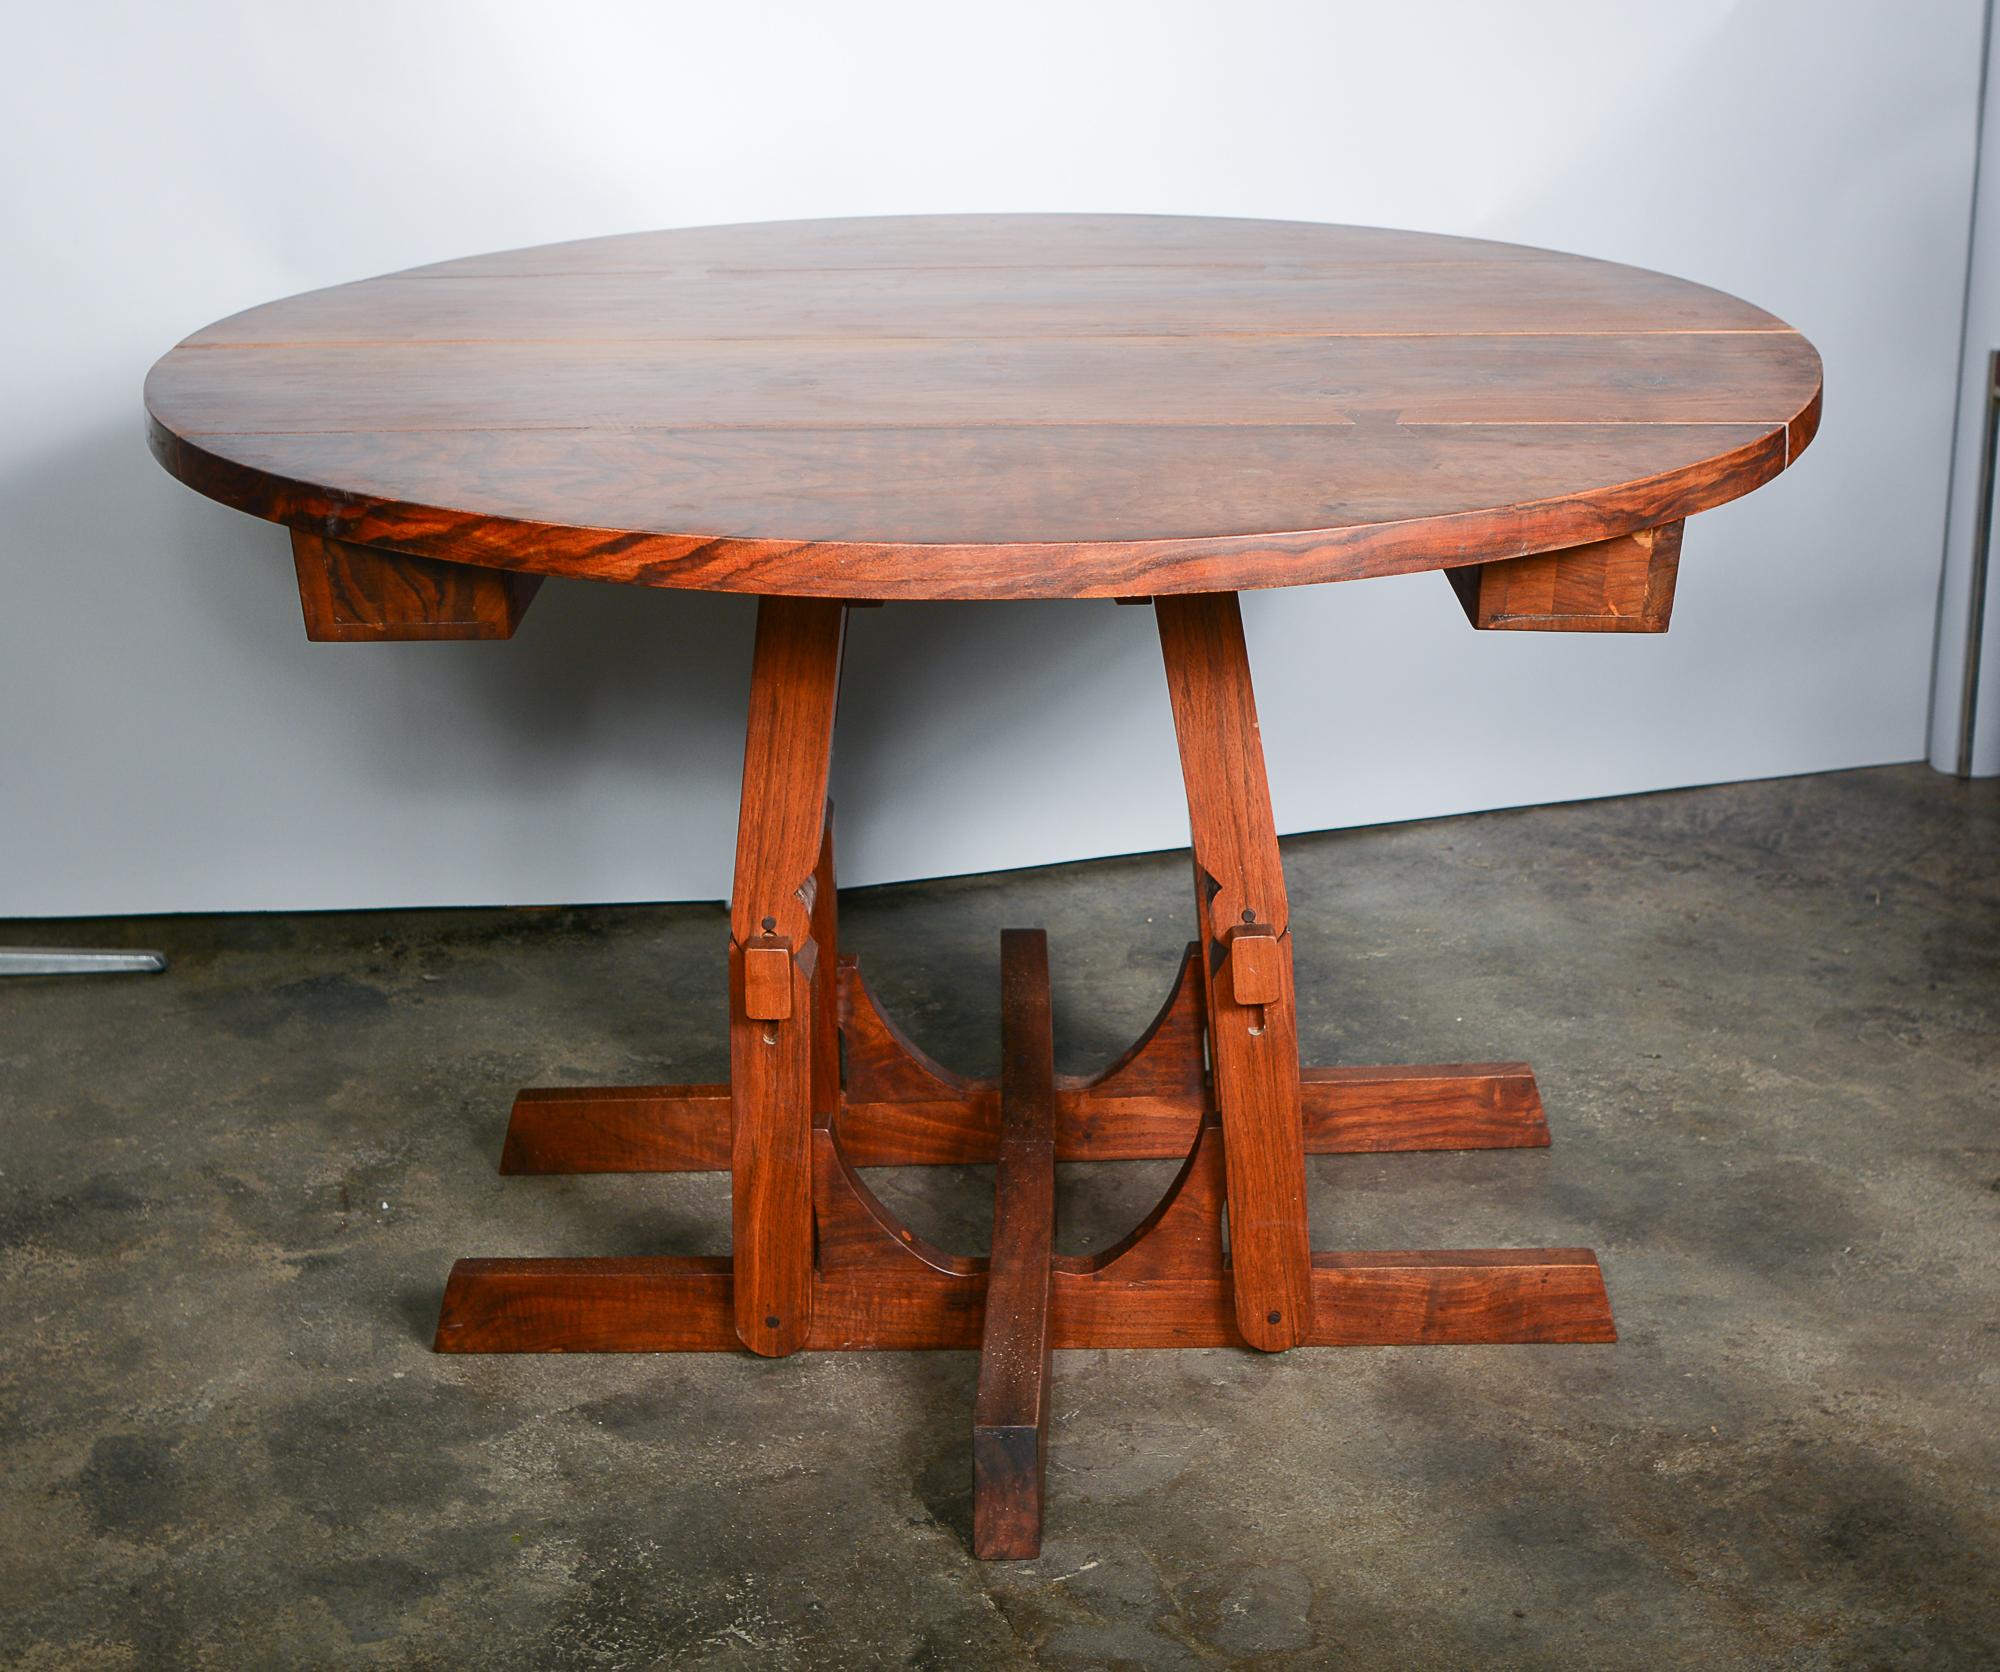 Solid walnut dining table by furniture designer and maker Morris Sheppard. This table expands up to 8 feet with four leaves. We believe this was a custom design for the clients as the table also lowers to 17 5/8 inches in height. The legs have a